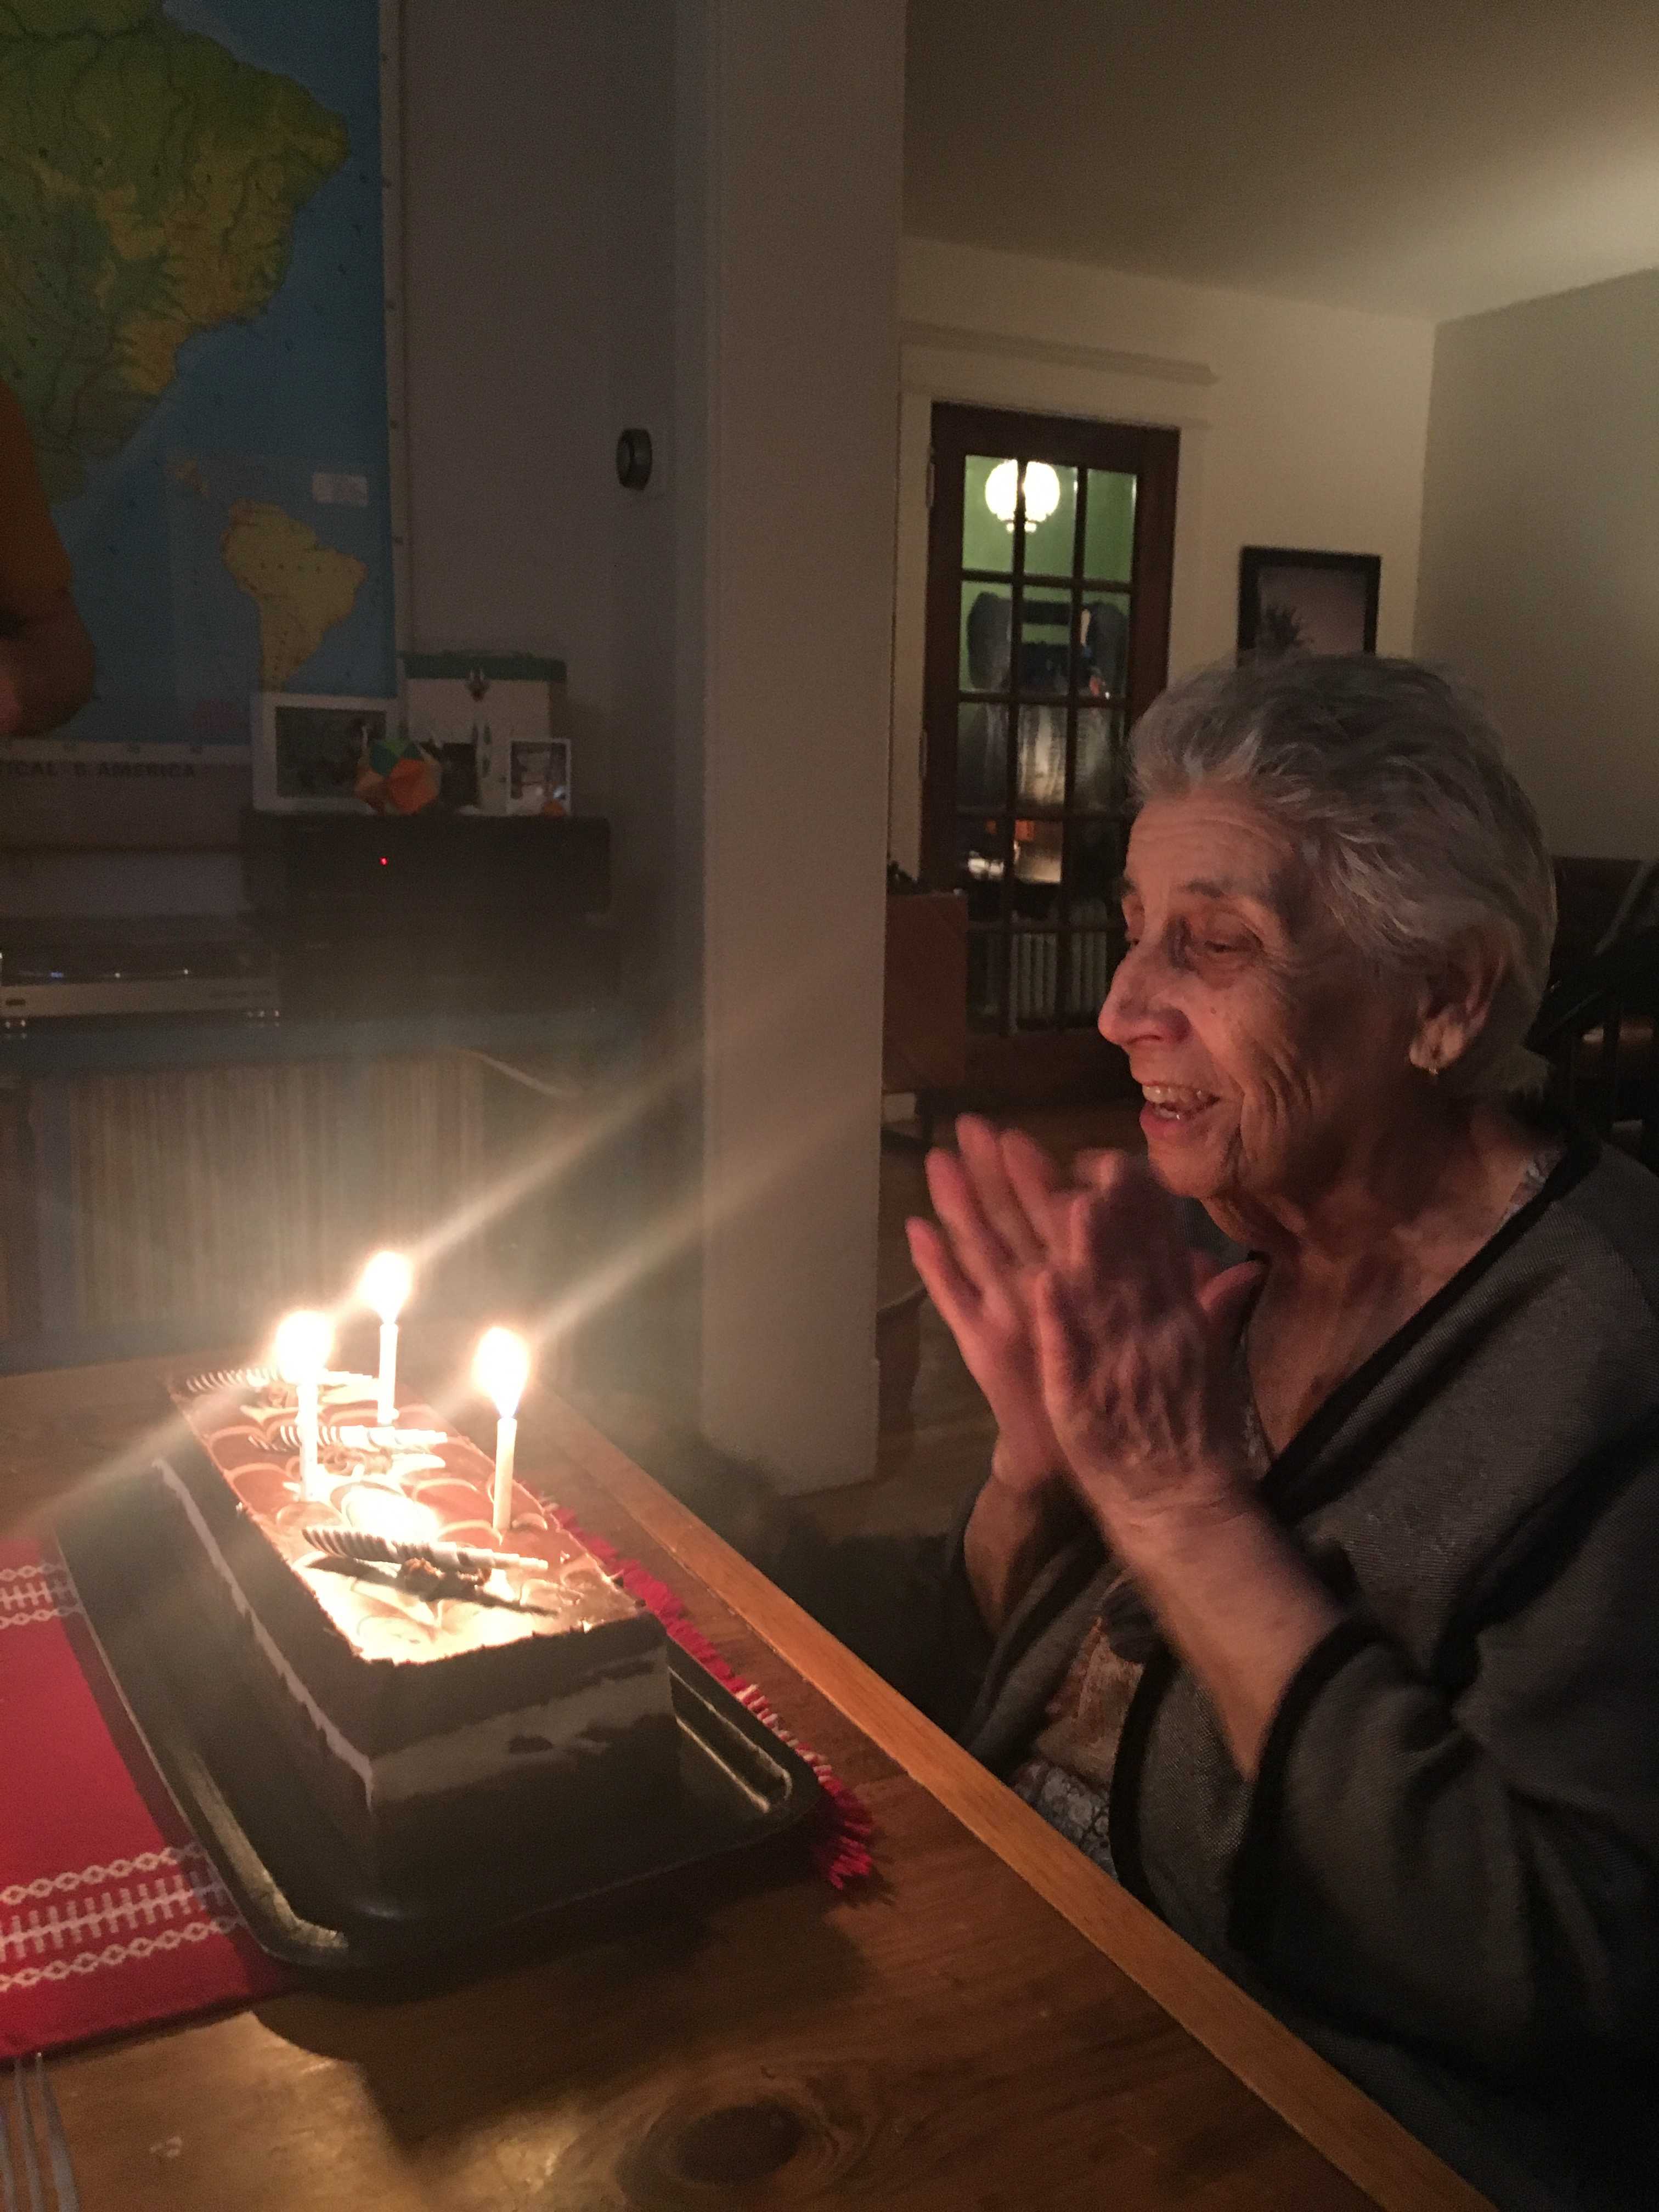 My grandma, clapping and singing in front of her lit birthday cake